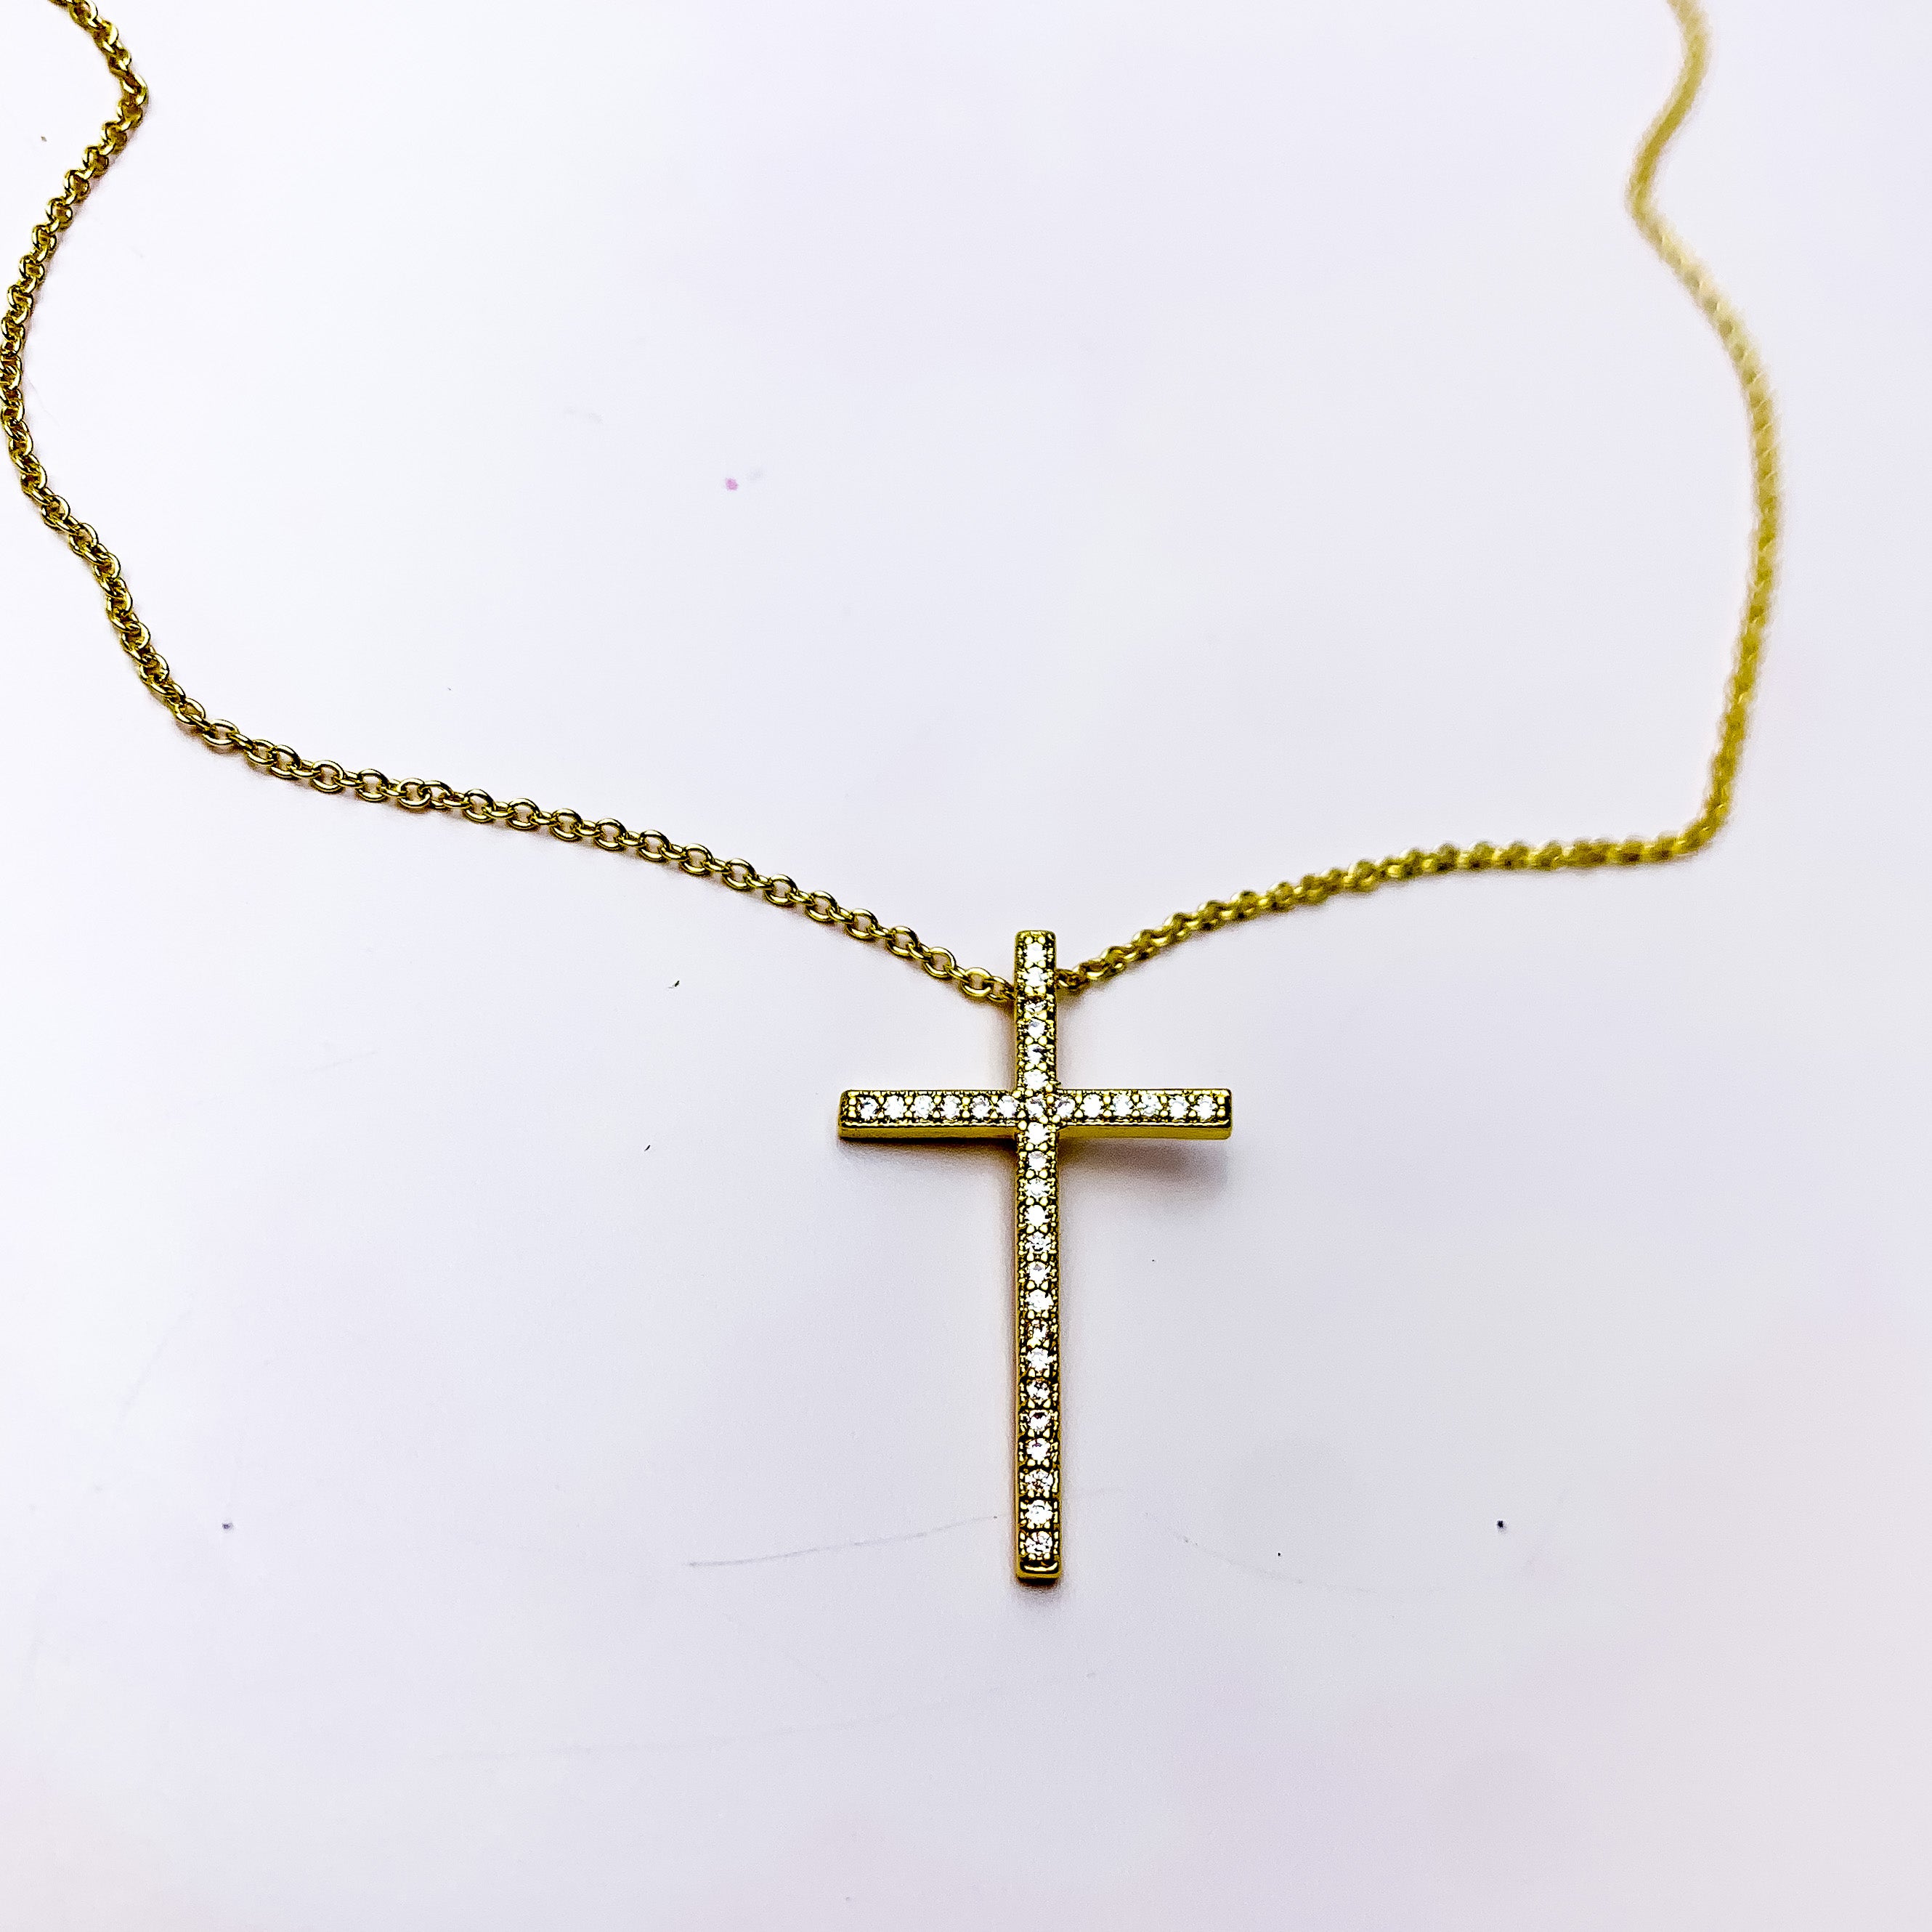 Gold Tone Necklace With Clear Crystal Cross Charm - Giddy Up Glamour Boutique